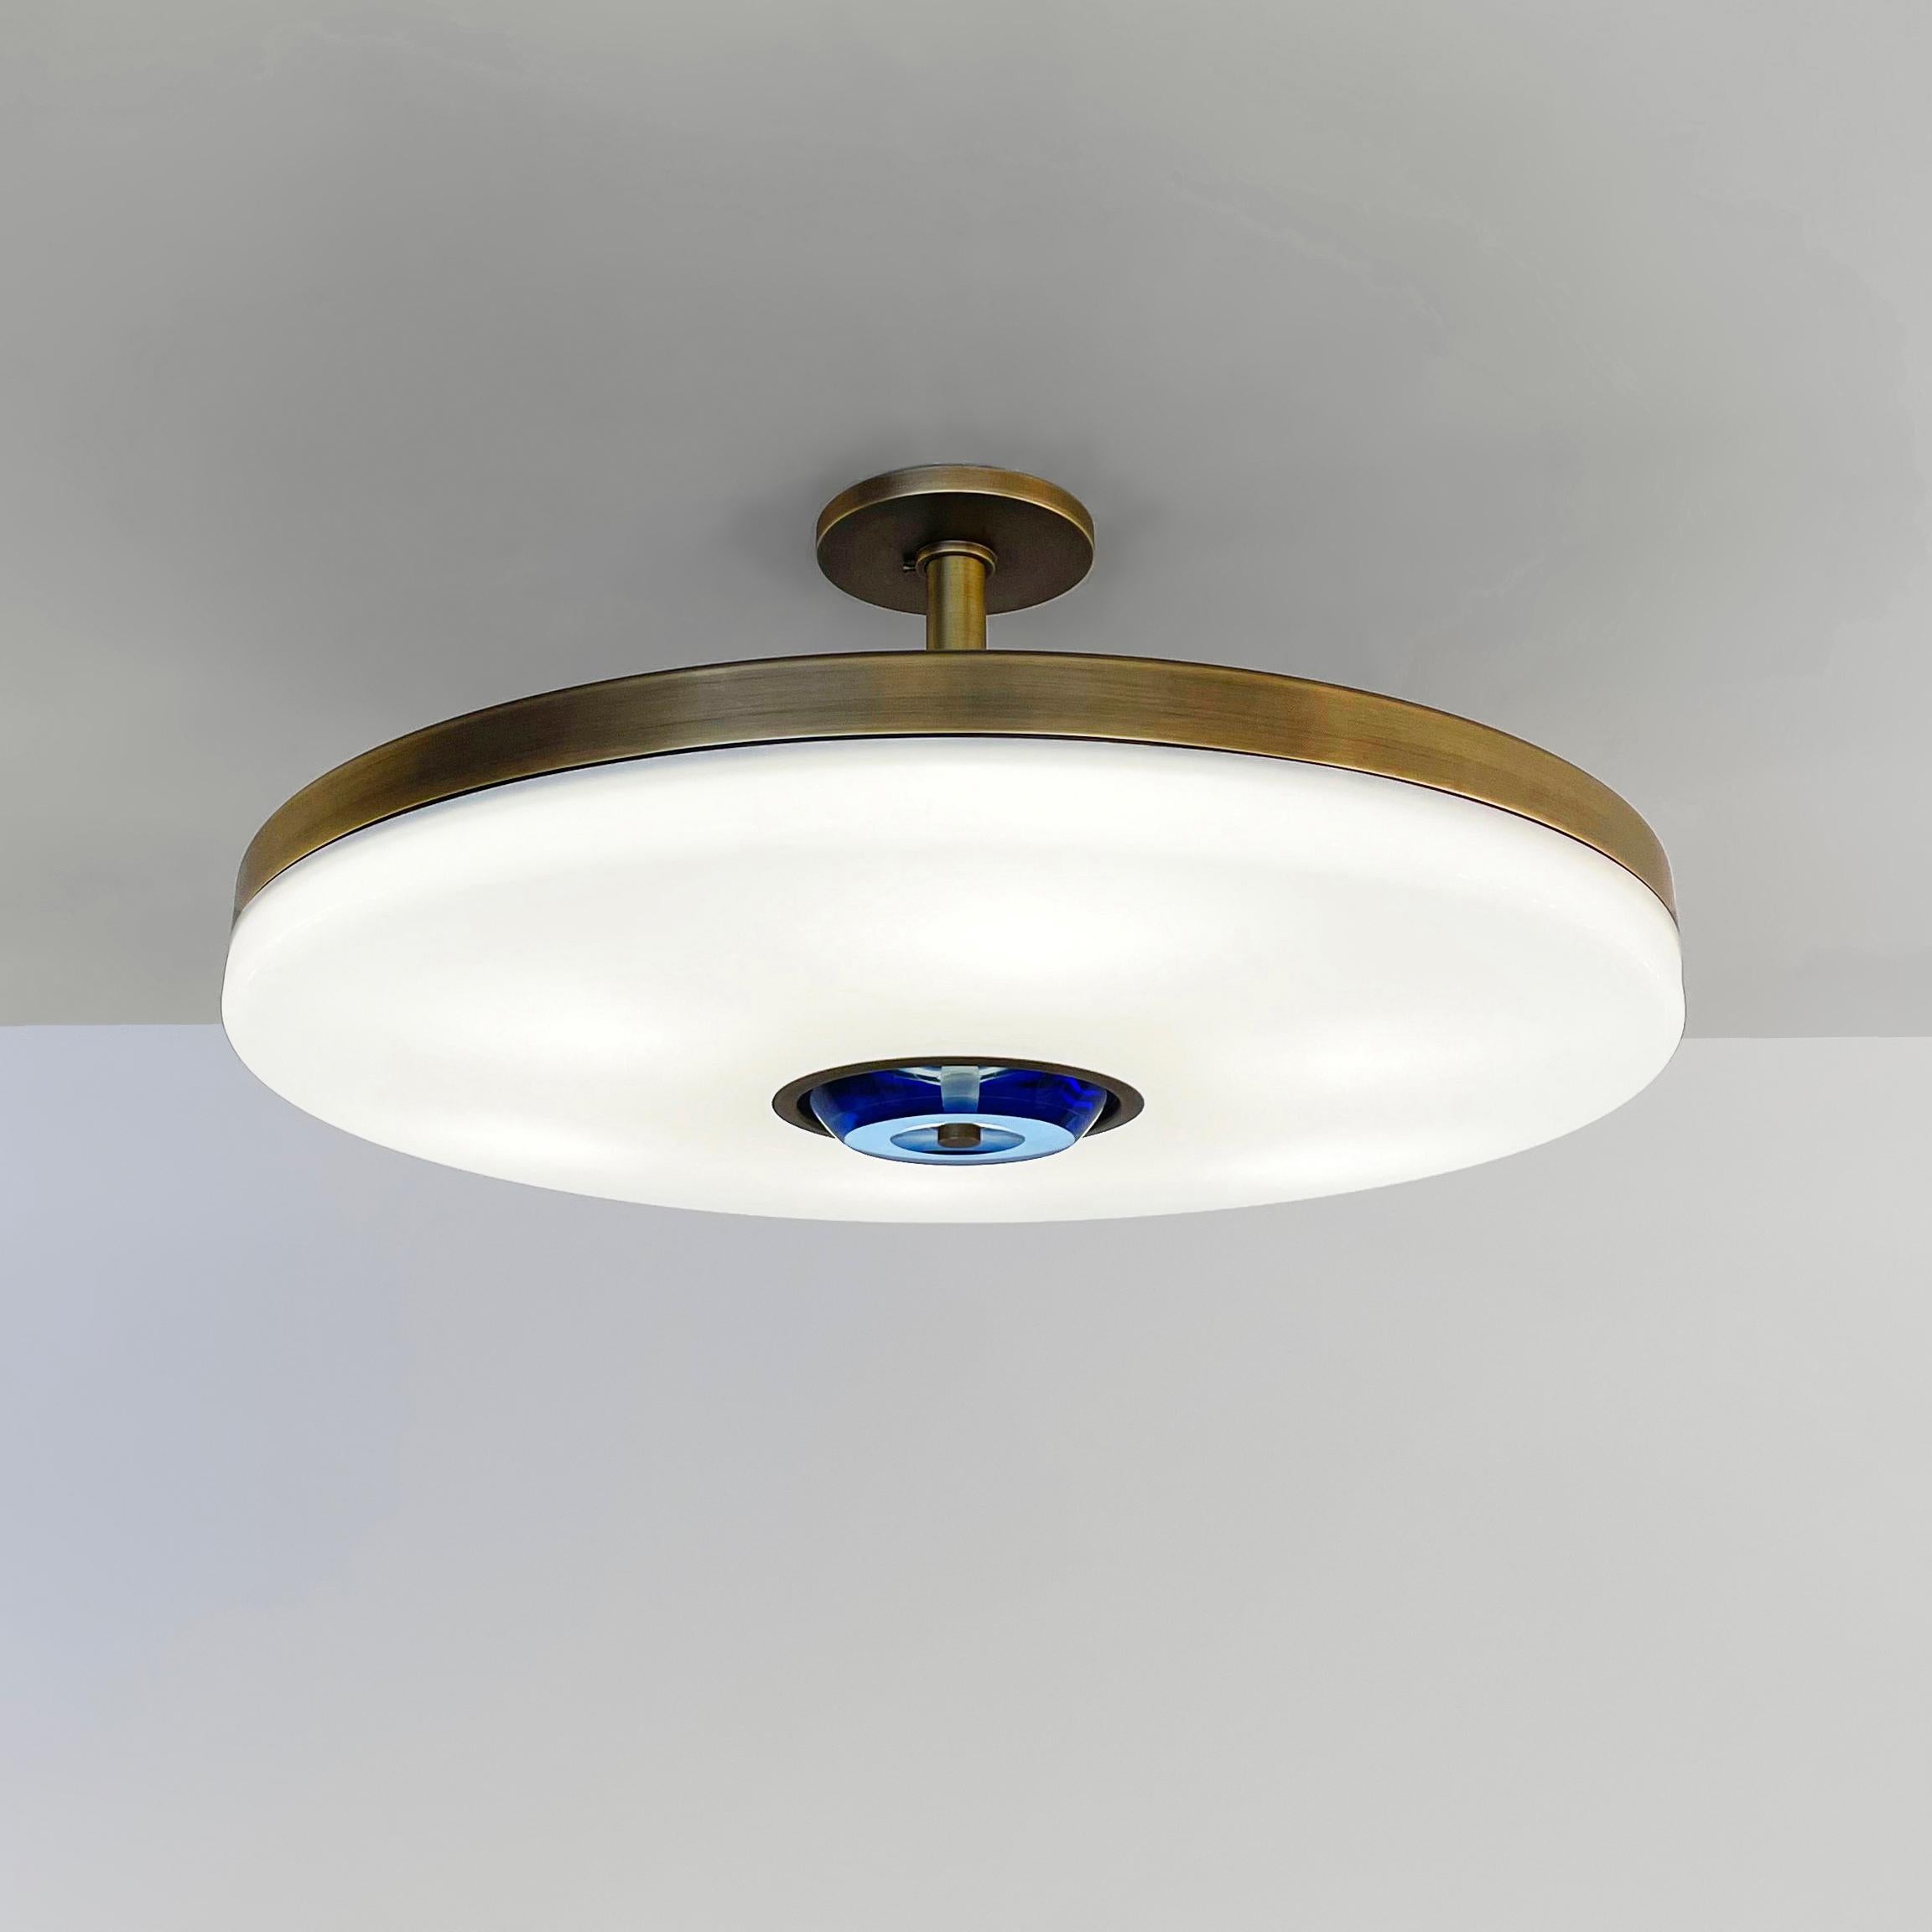 The Iris ceiling is designed around an expansive acrylic shade with a hand carved glass center. This versatile fixture can be installed as a pendant on a stem or as a true flush mount. The first images show the fixture in our Bronzo Ottone (Bronze)